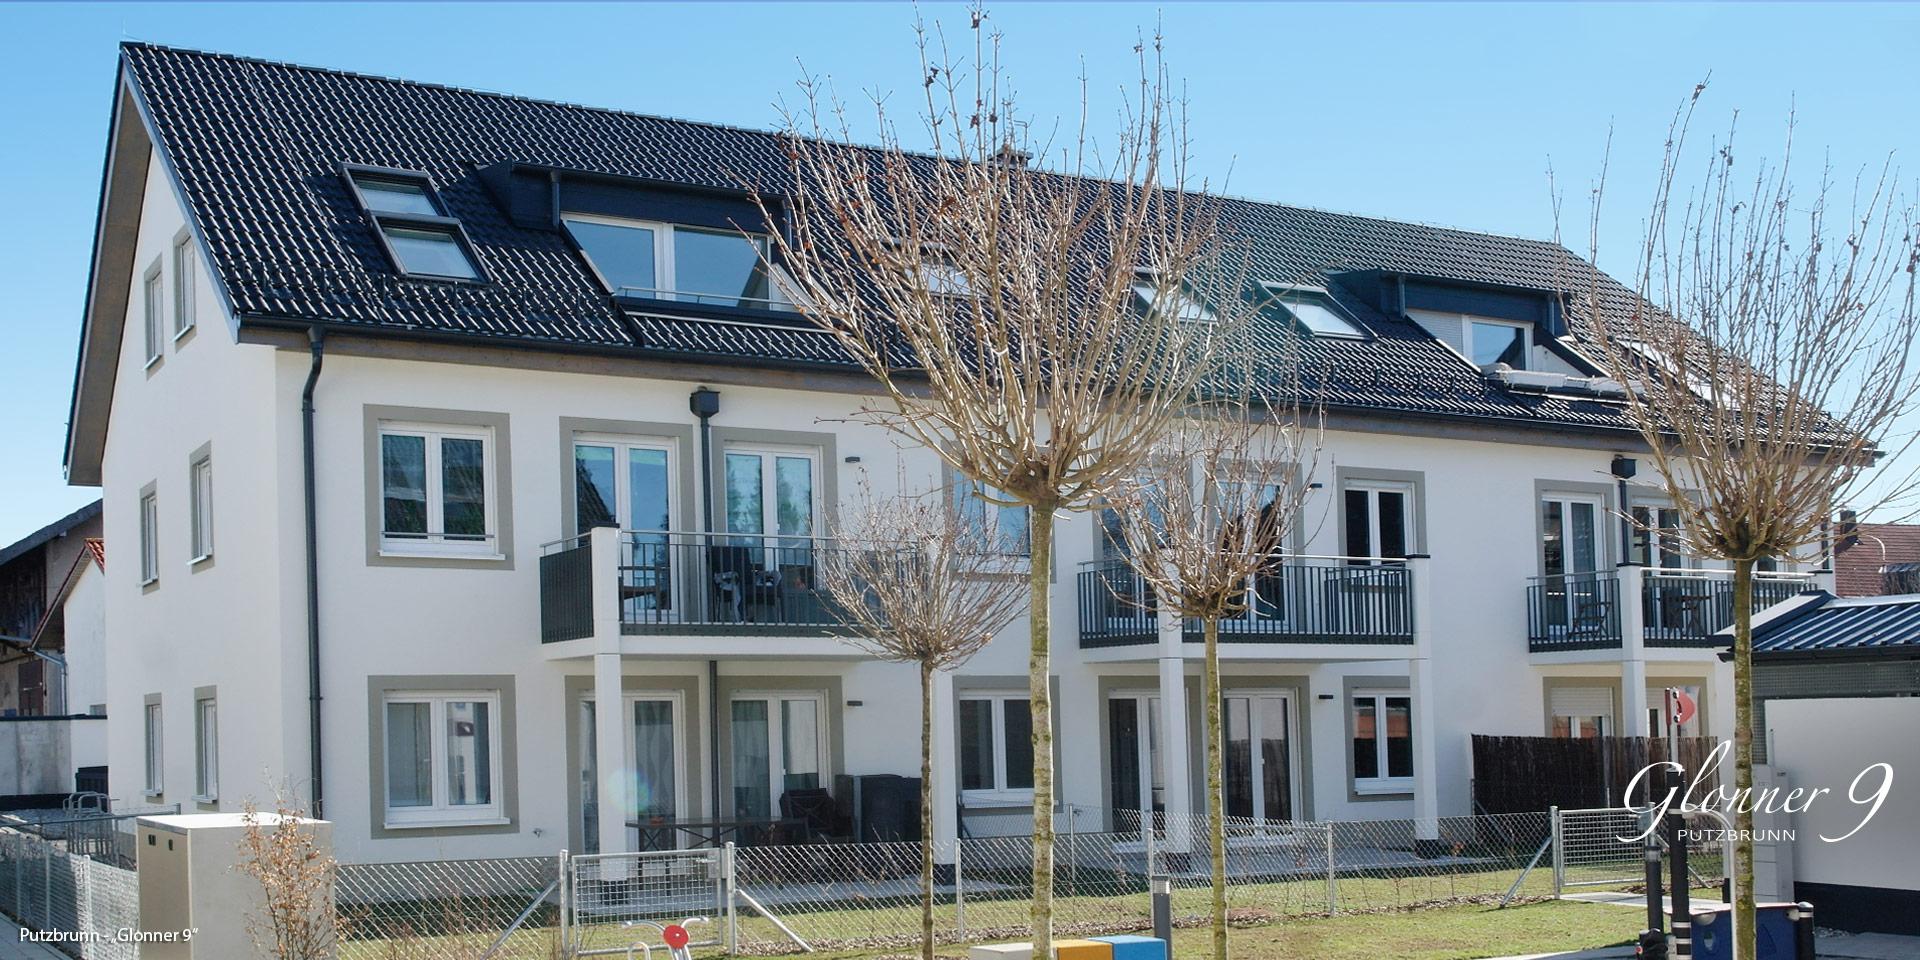 'Glonner 9' in Putzbrunn: All condominiums and townhouses have been sold